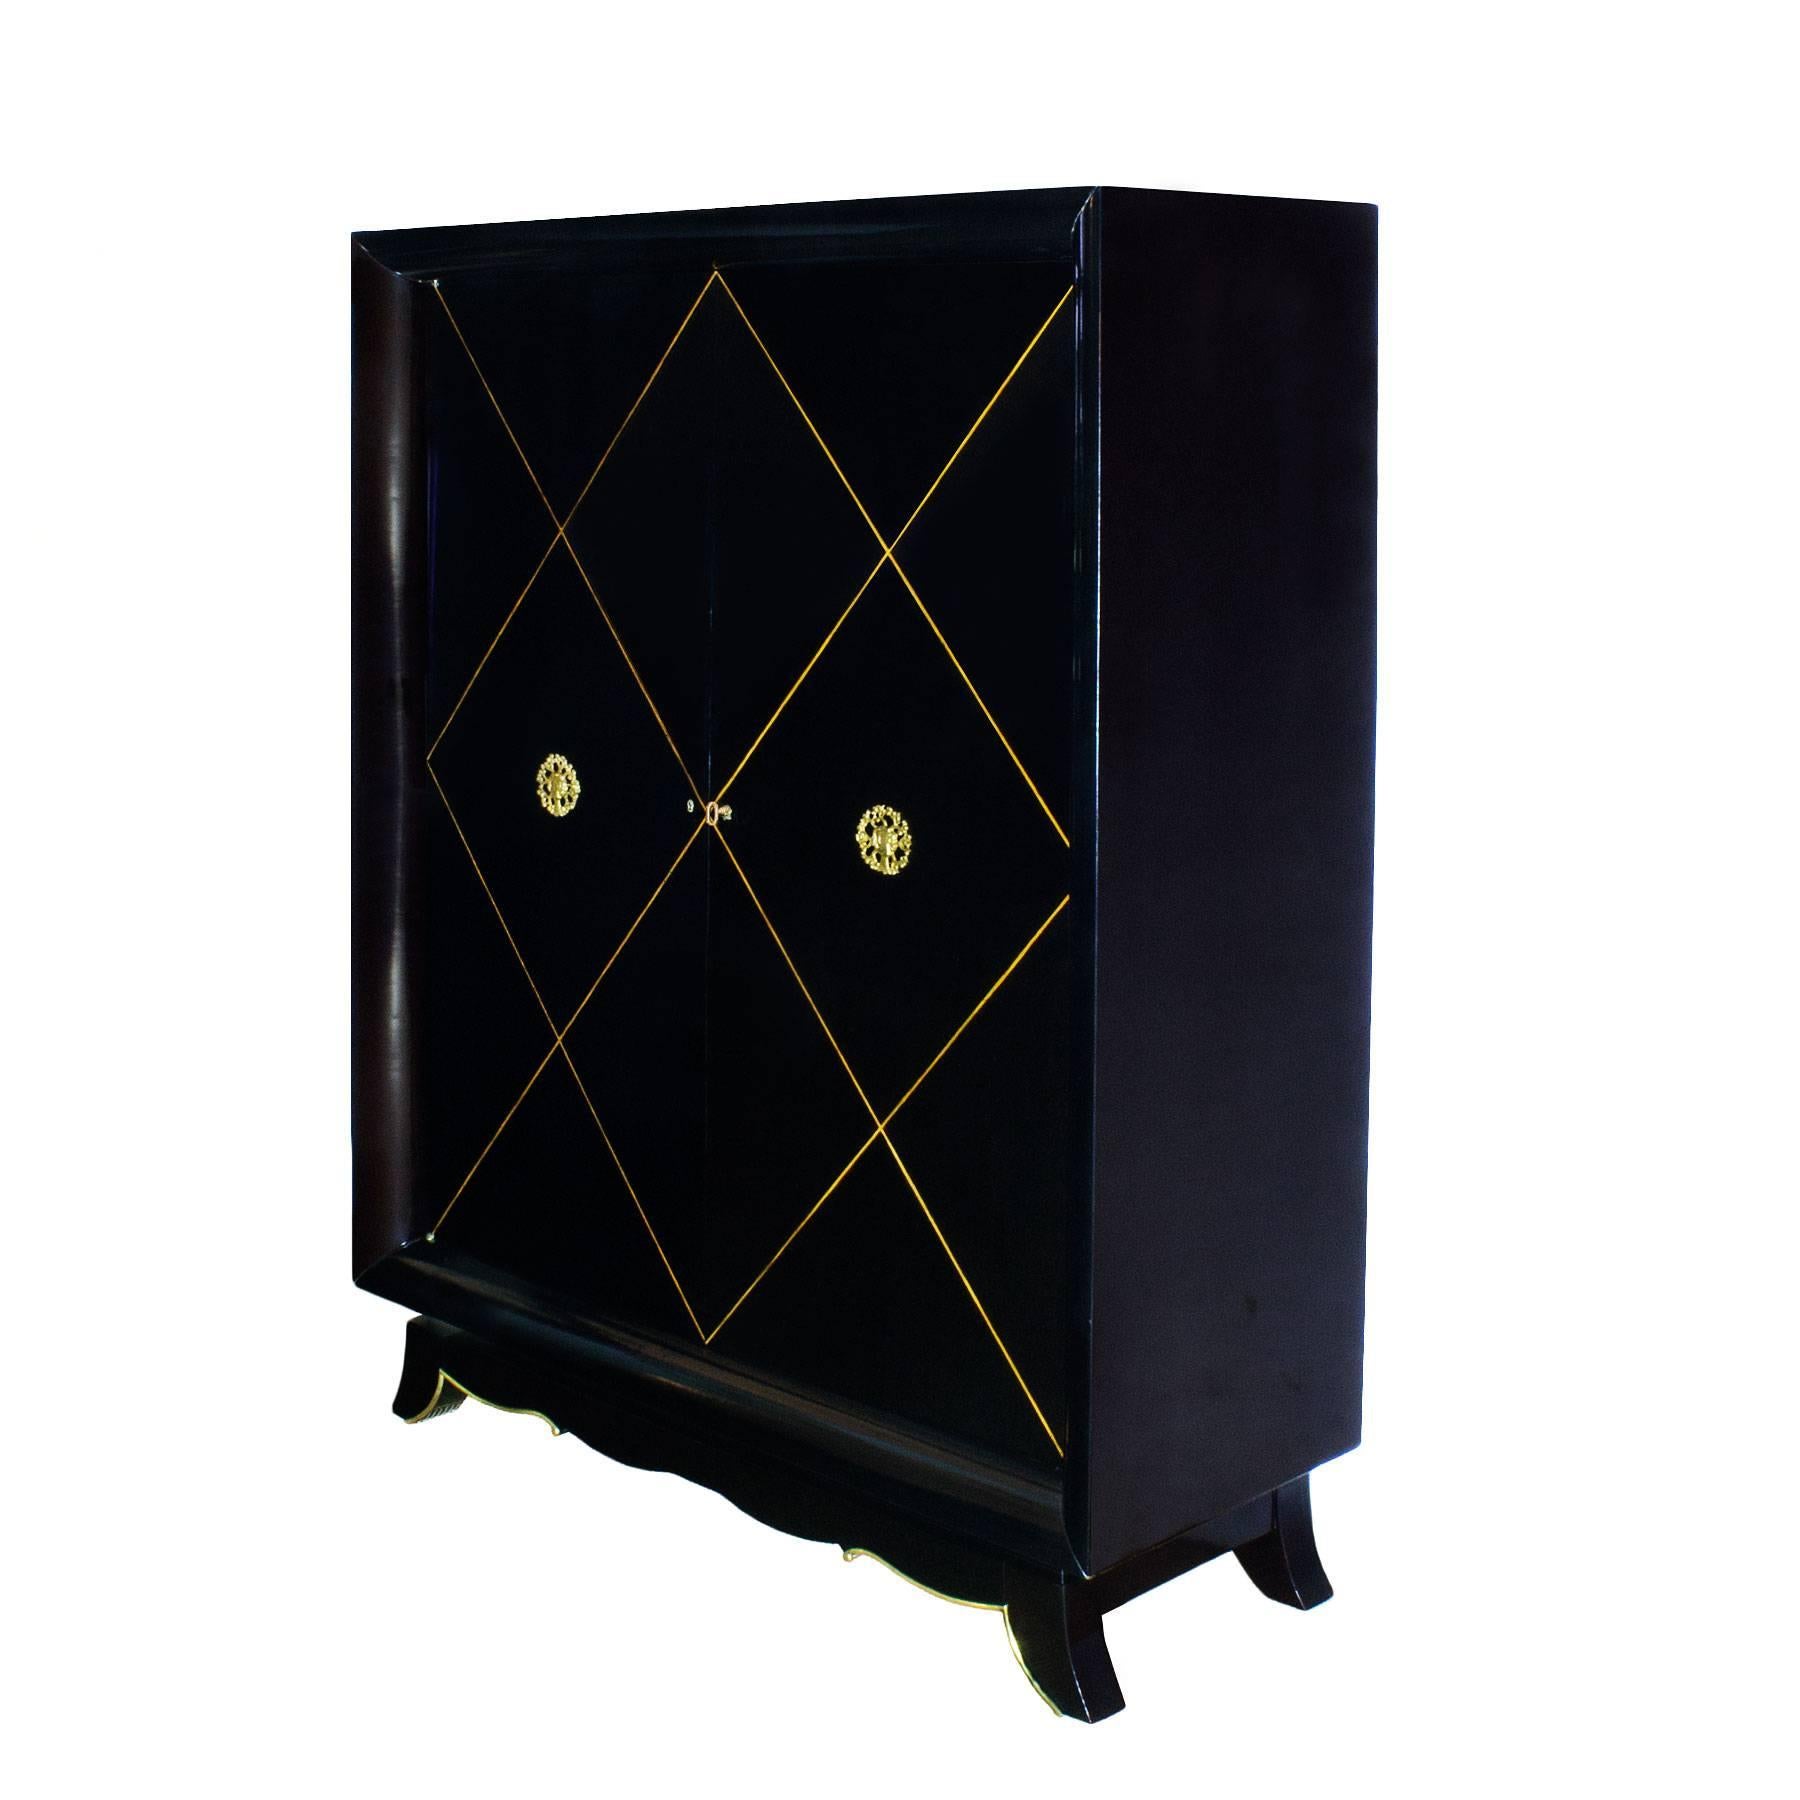 Nice cupboard, stained maple with sycamore geometrical marquetry on doors, french polish. Two lovely golden bronze decorations representing spring and summer. Polished brass strips on base. Three shelves inside, adjustable height. Can be completely